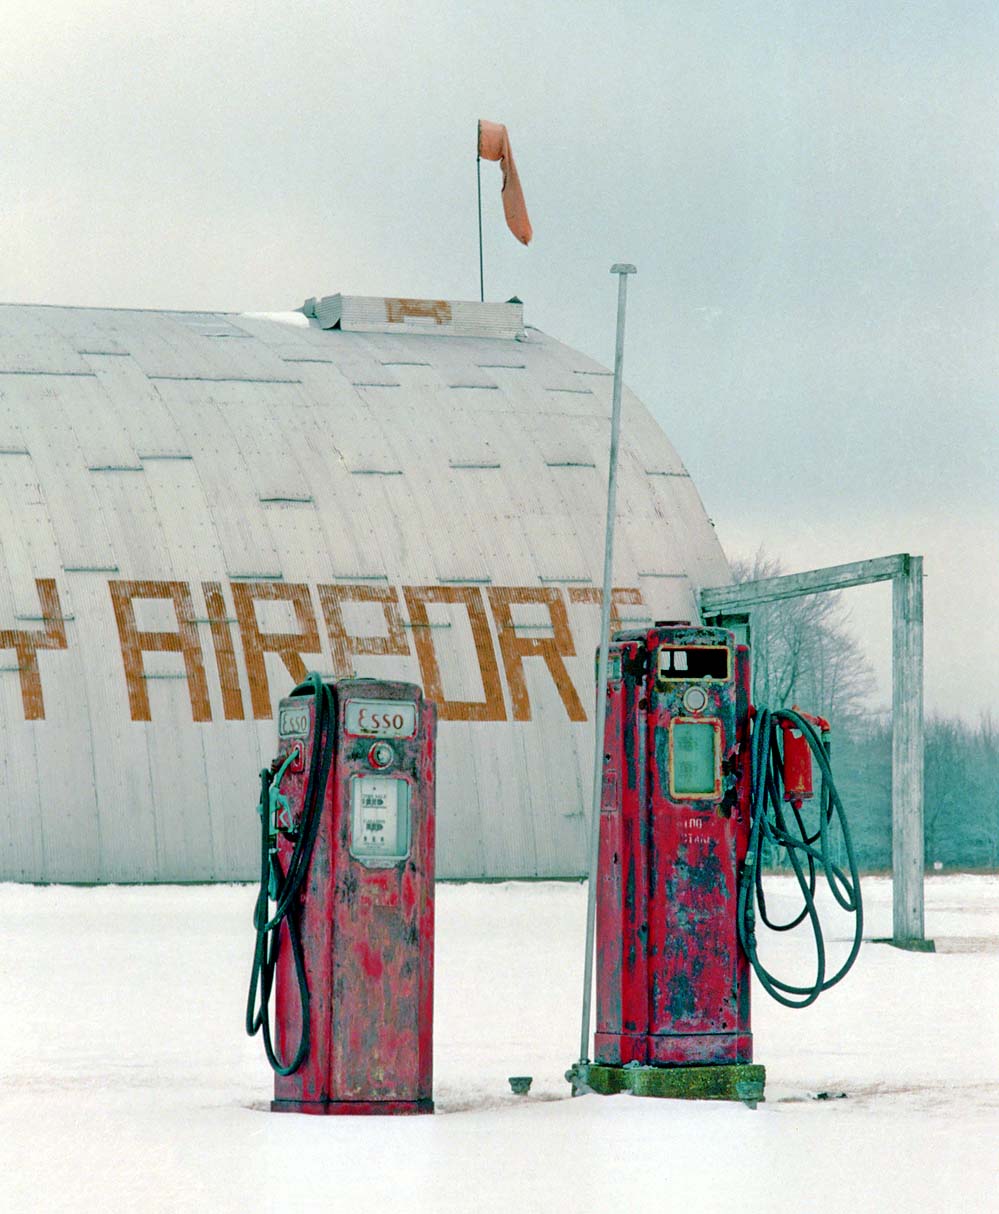 ESSO at the ancient Potato City Airport